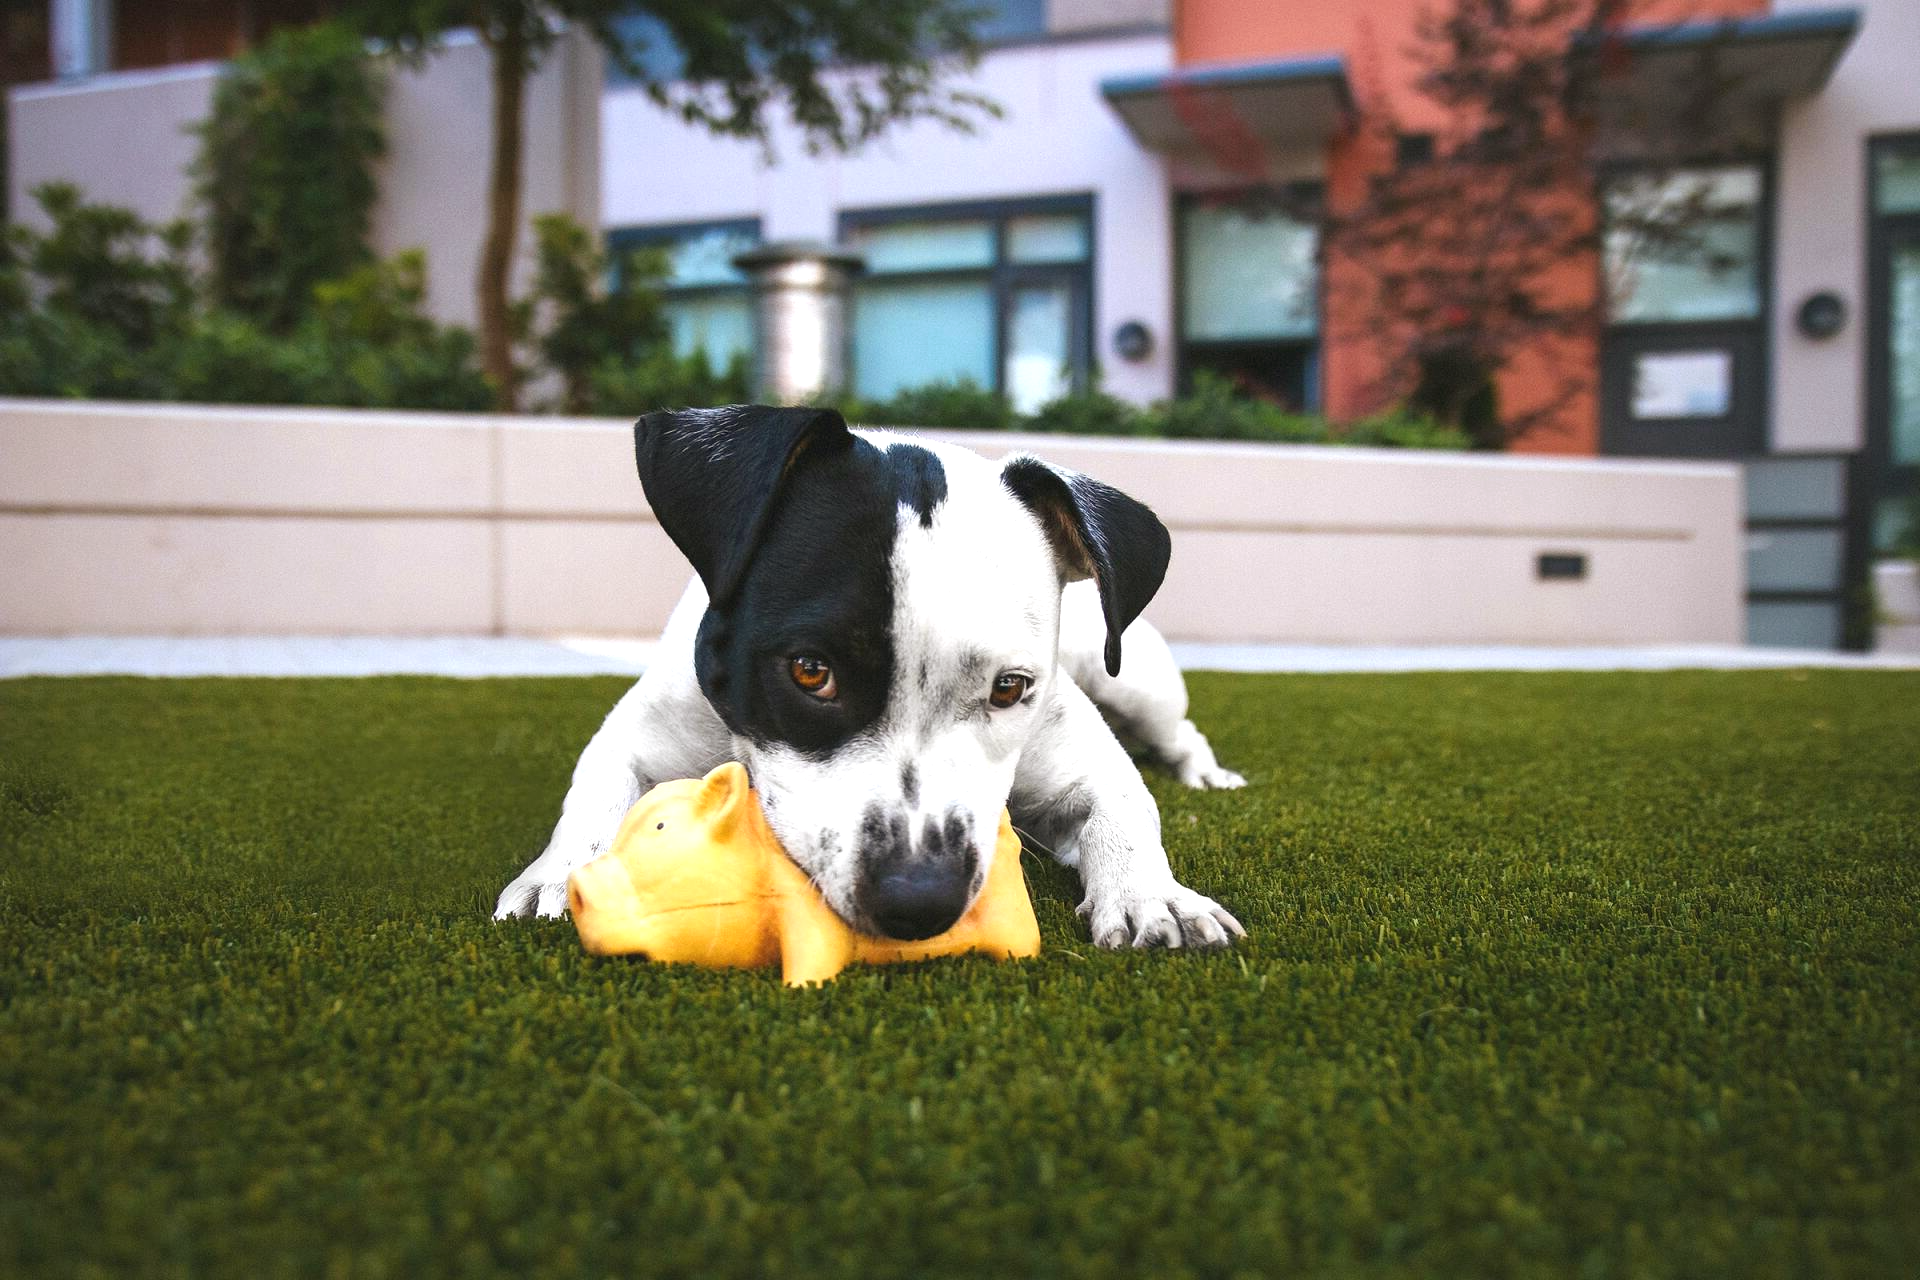 dog chewing on his pig toy while enjoying playing around his pet turf